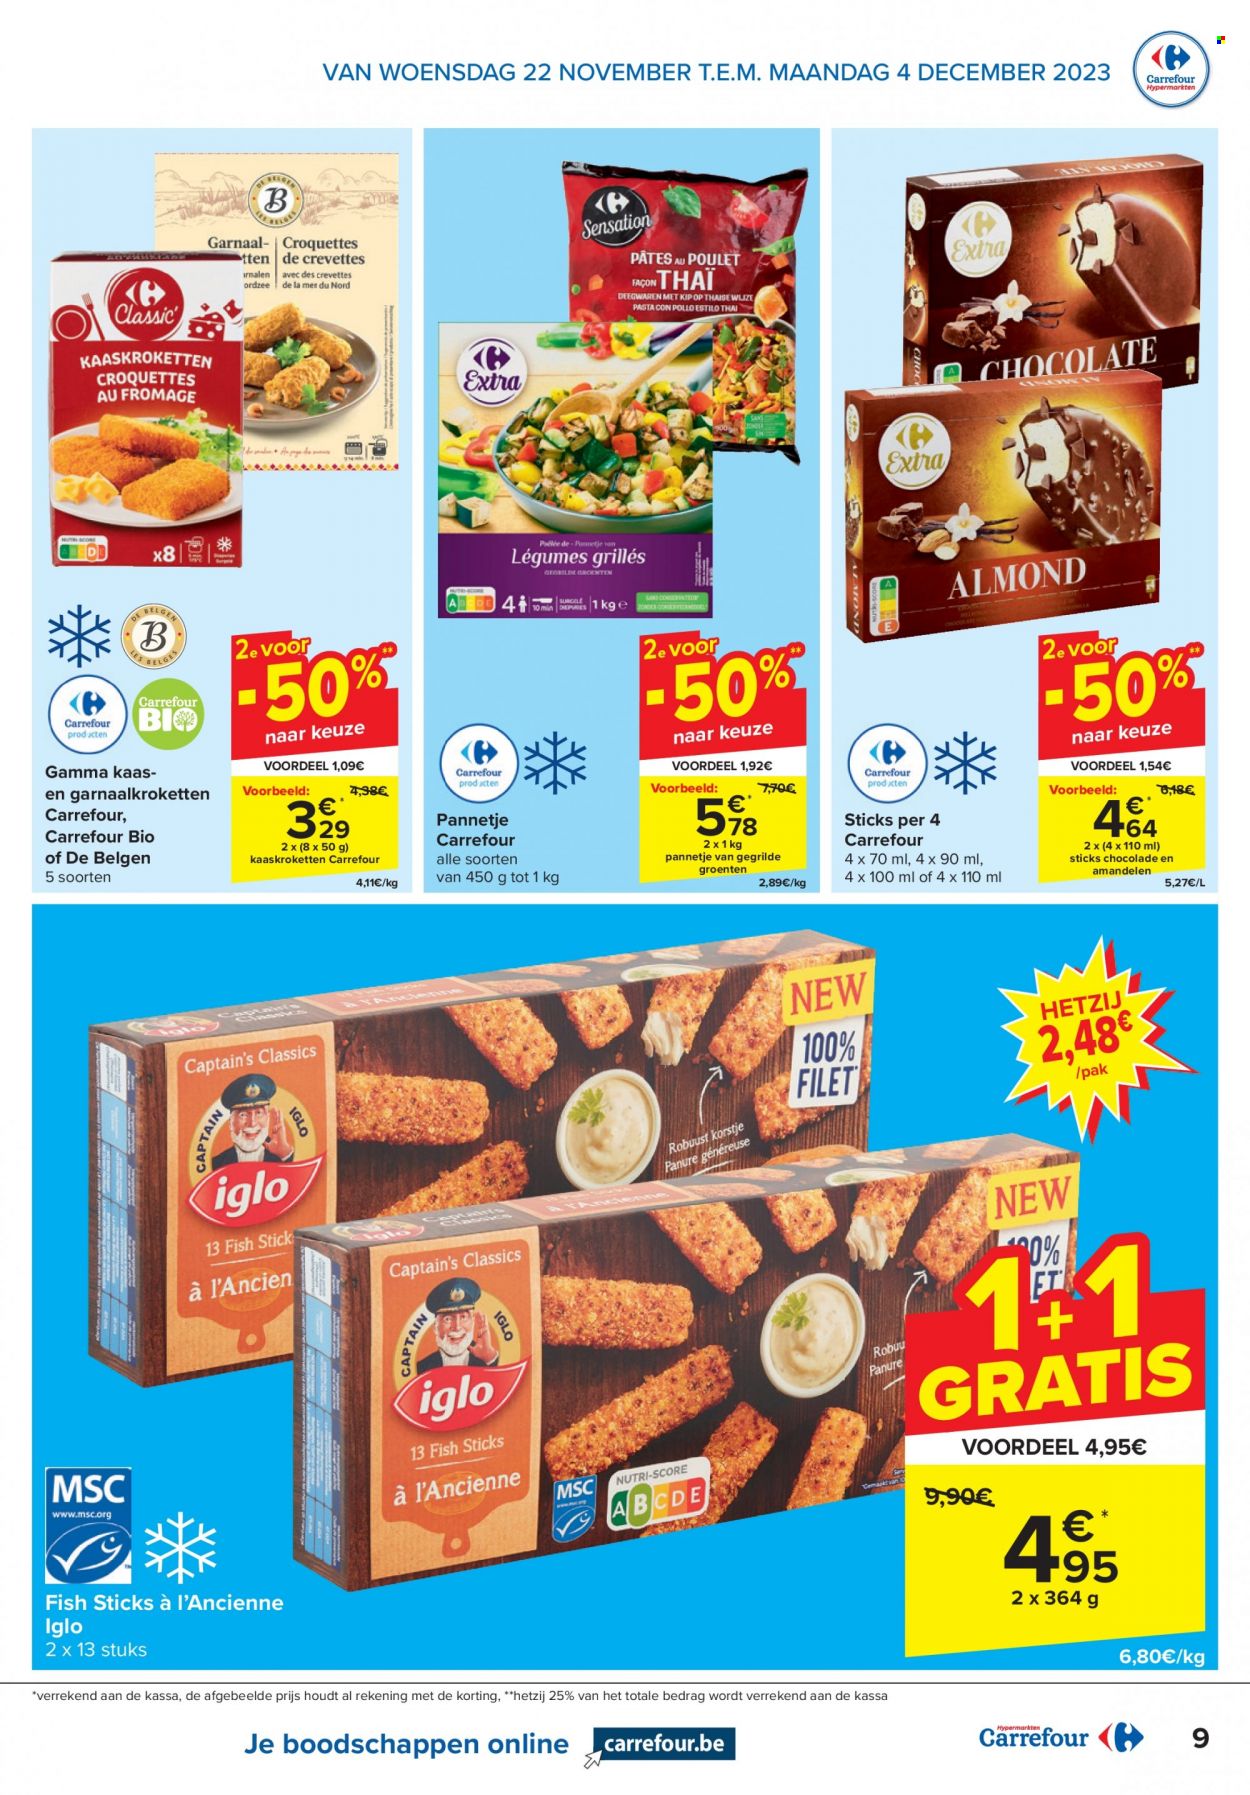 Catalogue Carrefour hypermarkt - 22.11.2023 - 4.12.2023. Page 9.